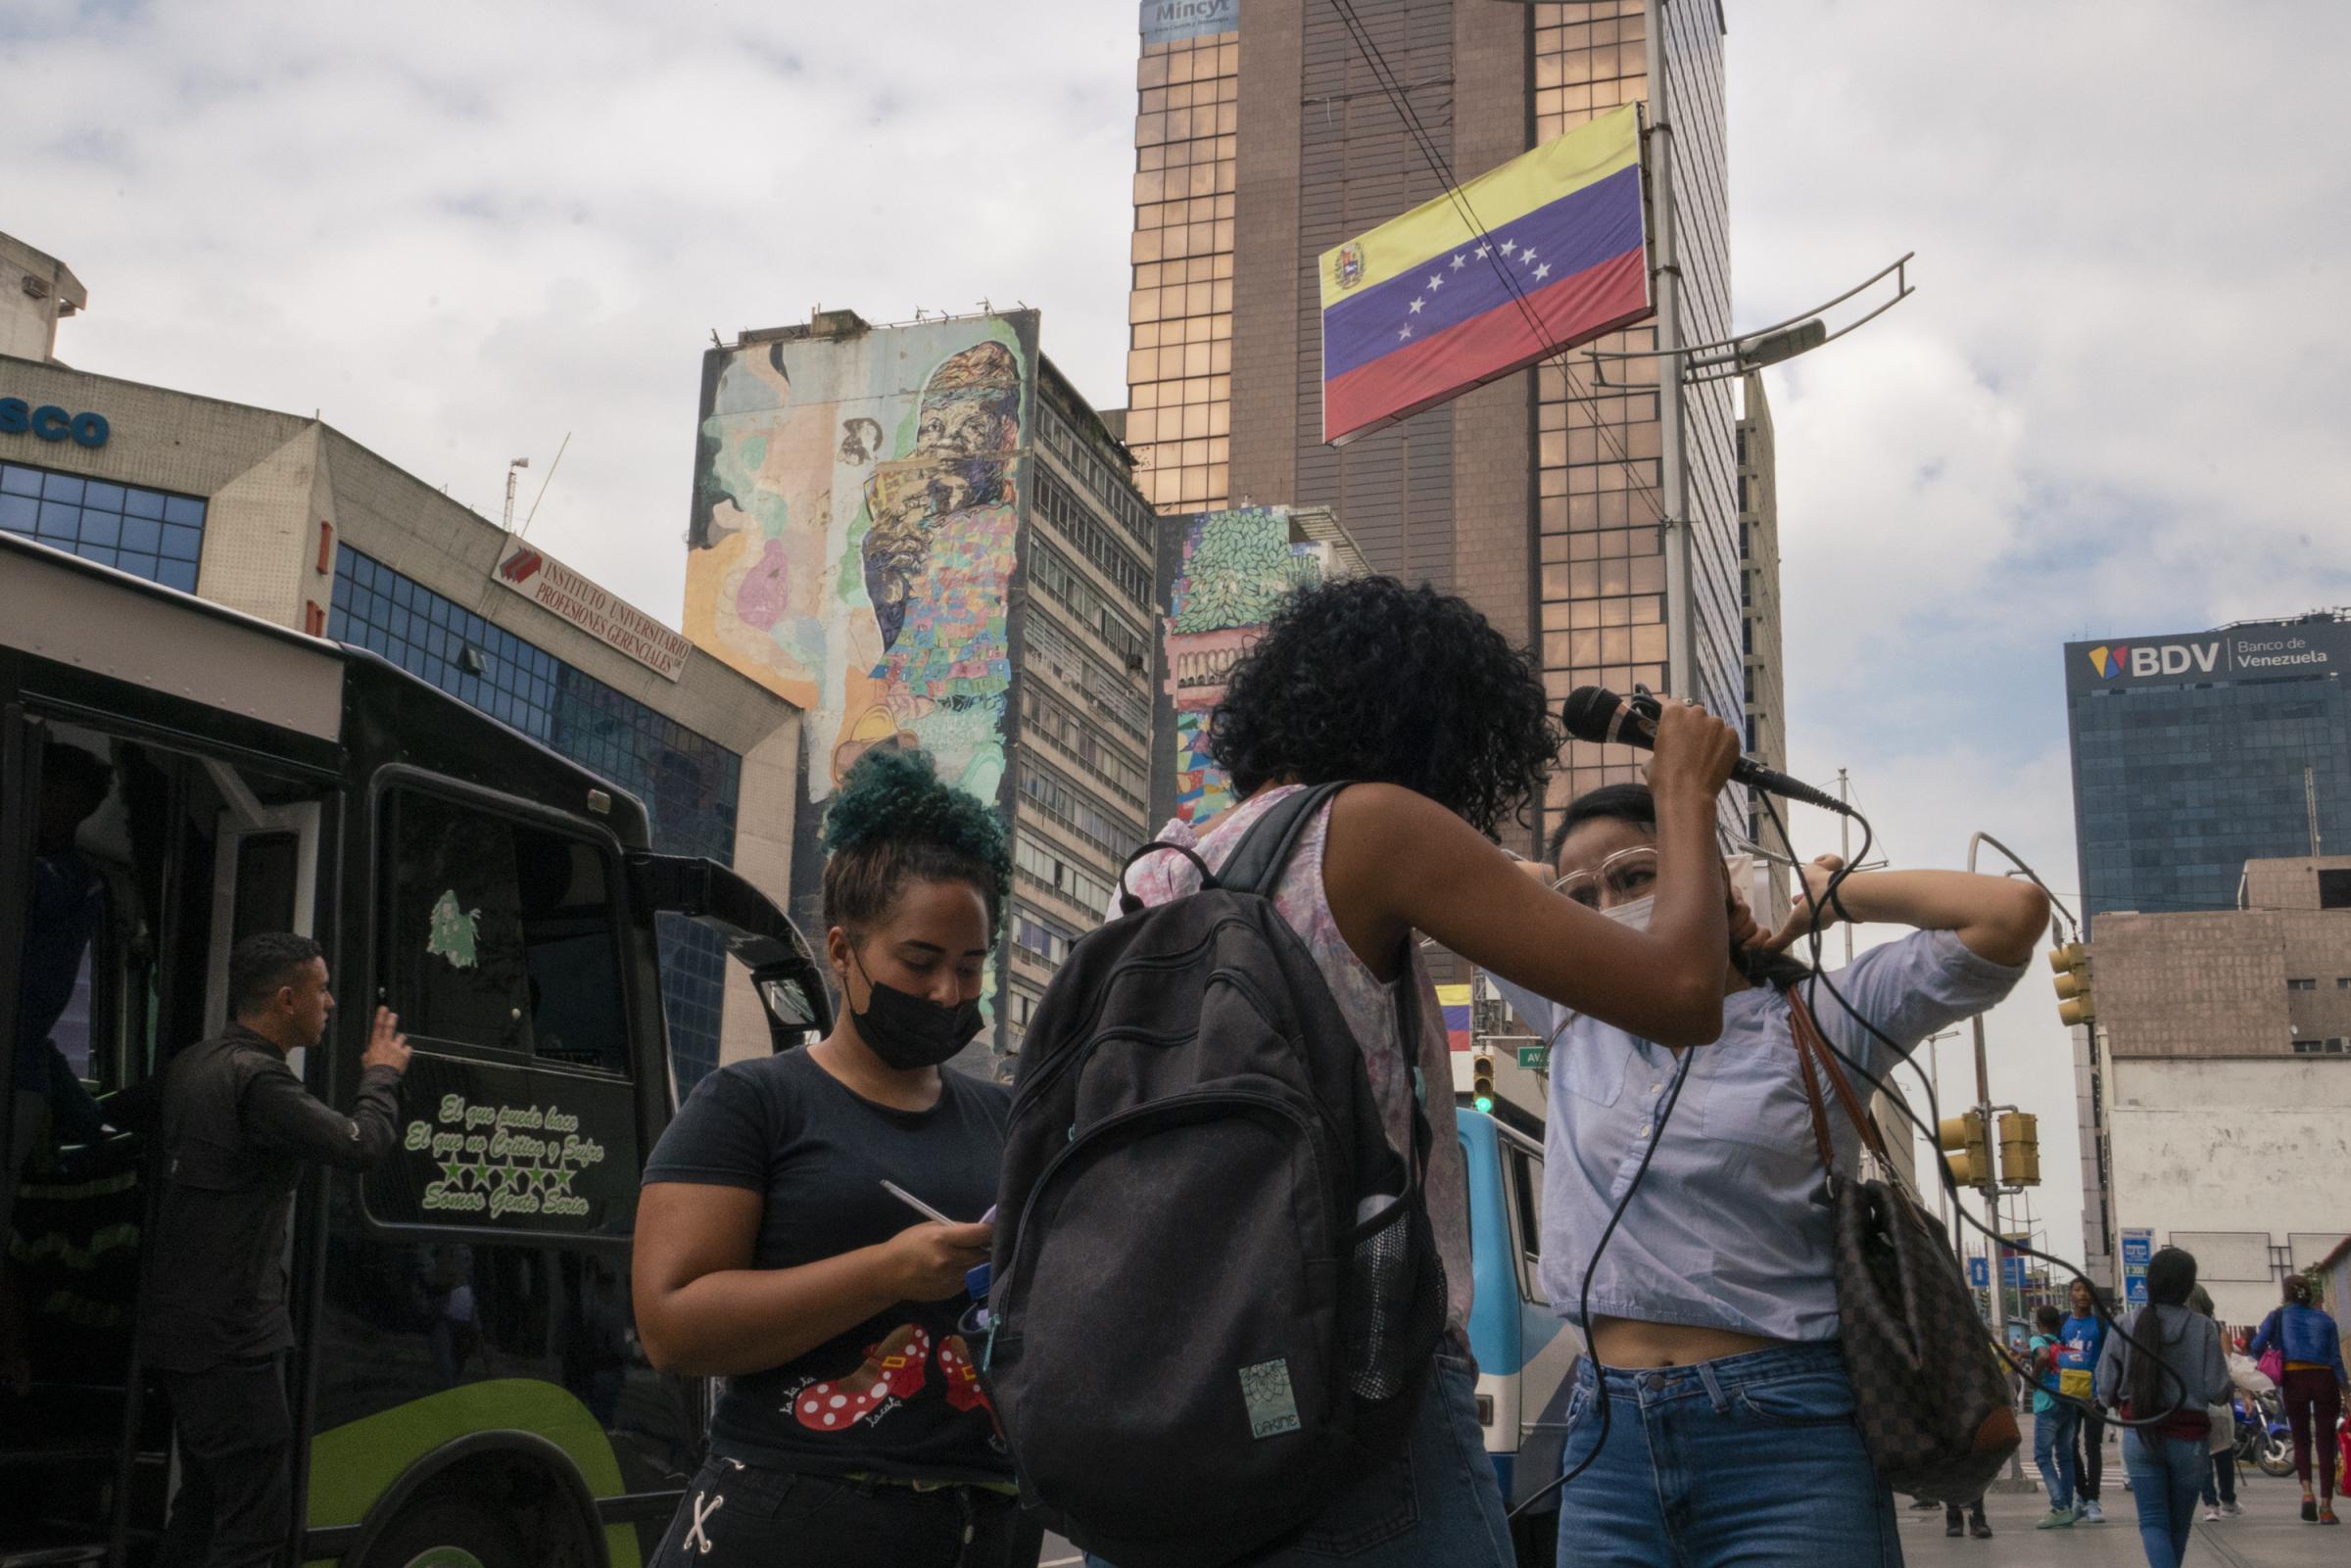 The Washington Post | On buses and balconies, Venezuela’s citizen reporters take news to the people